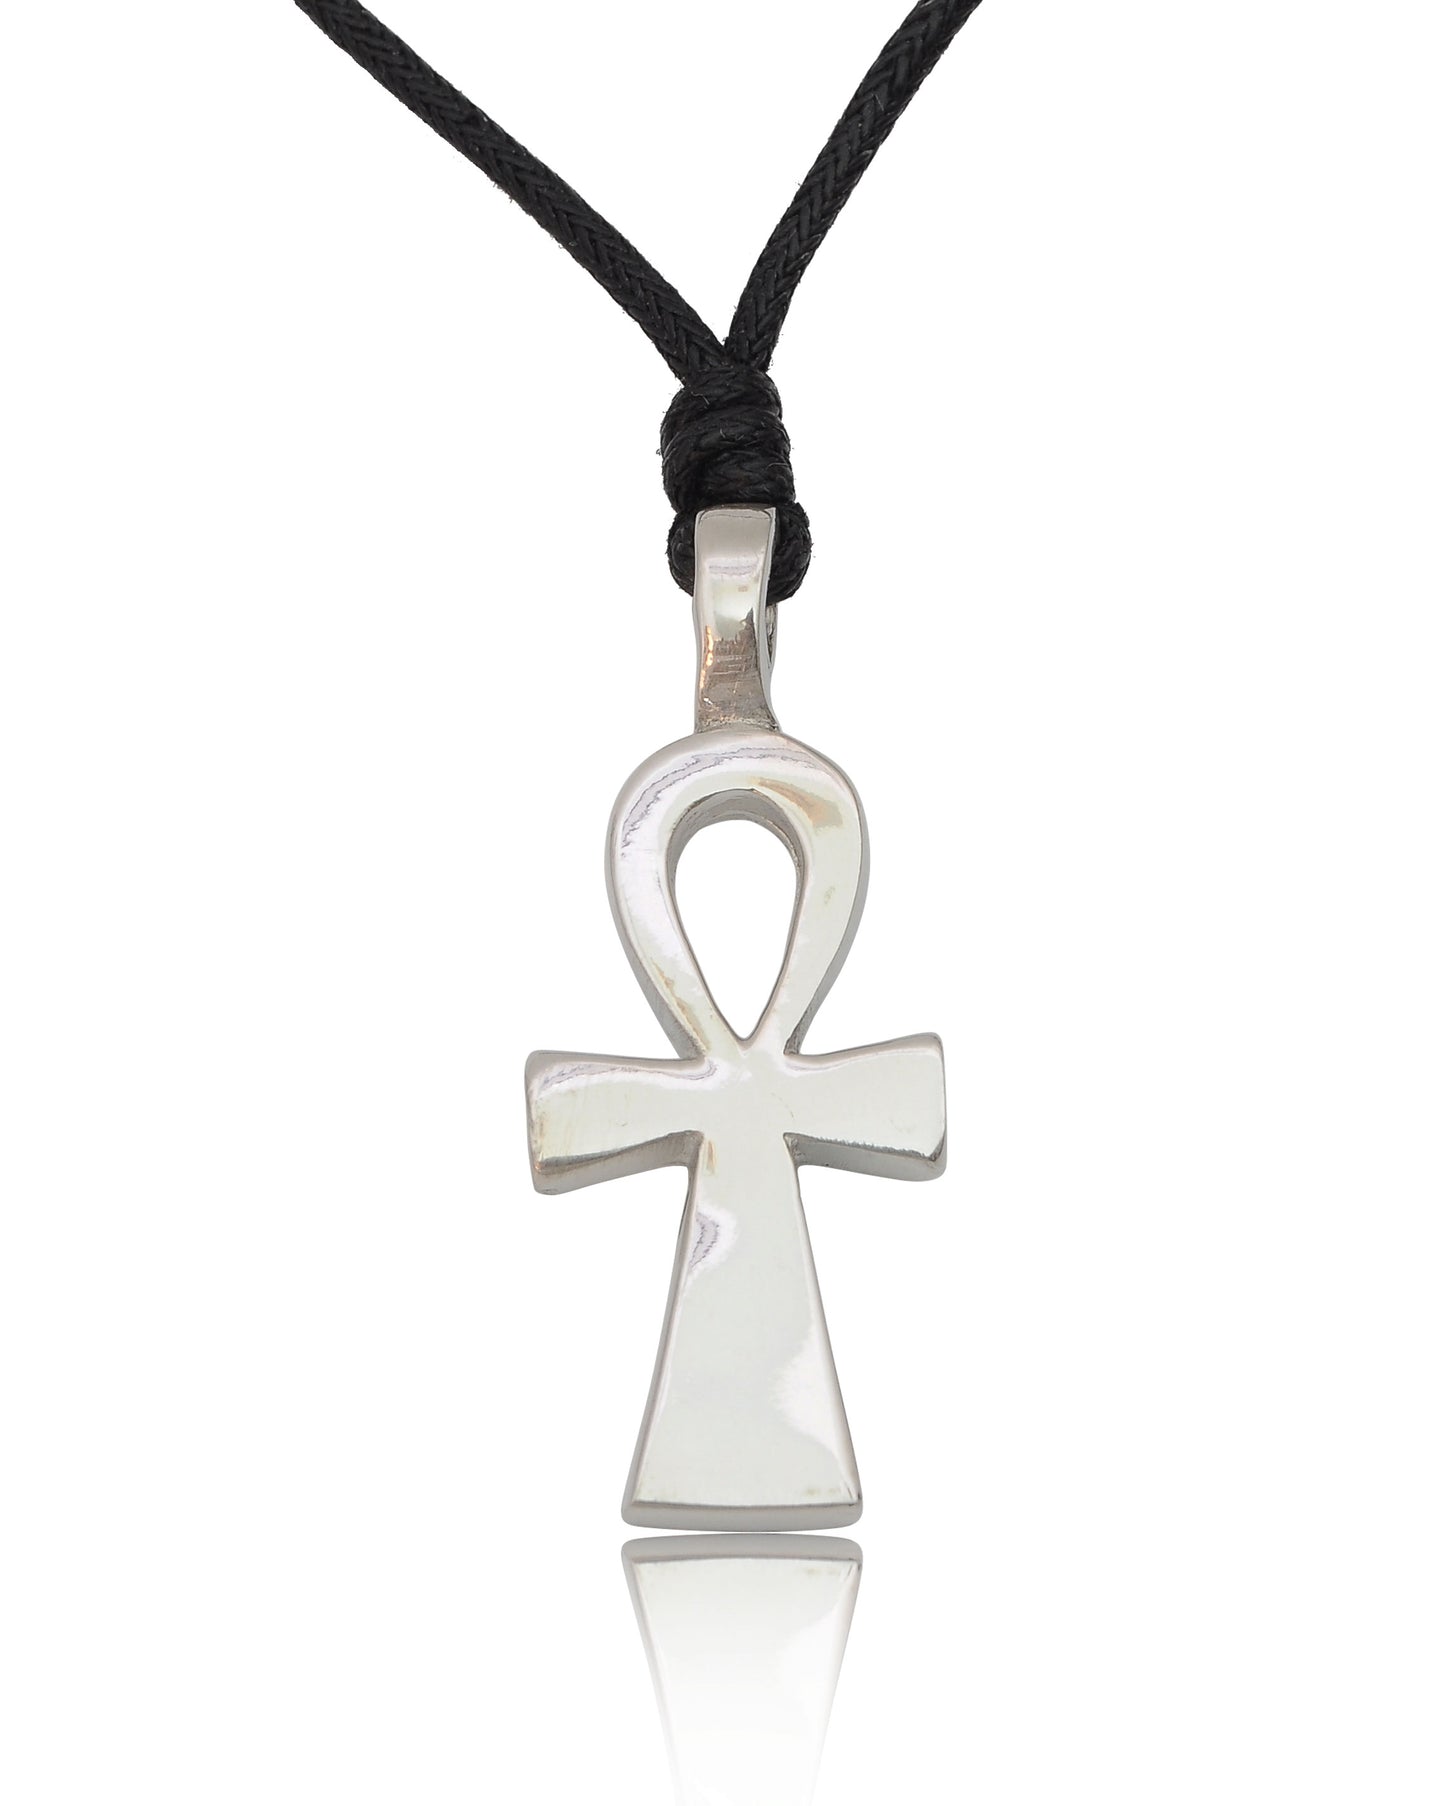 Egyptian Ankh Key Sterling-silver Pewter Brass Charm Necklace Pendant Jewelry